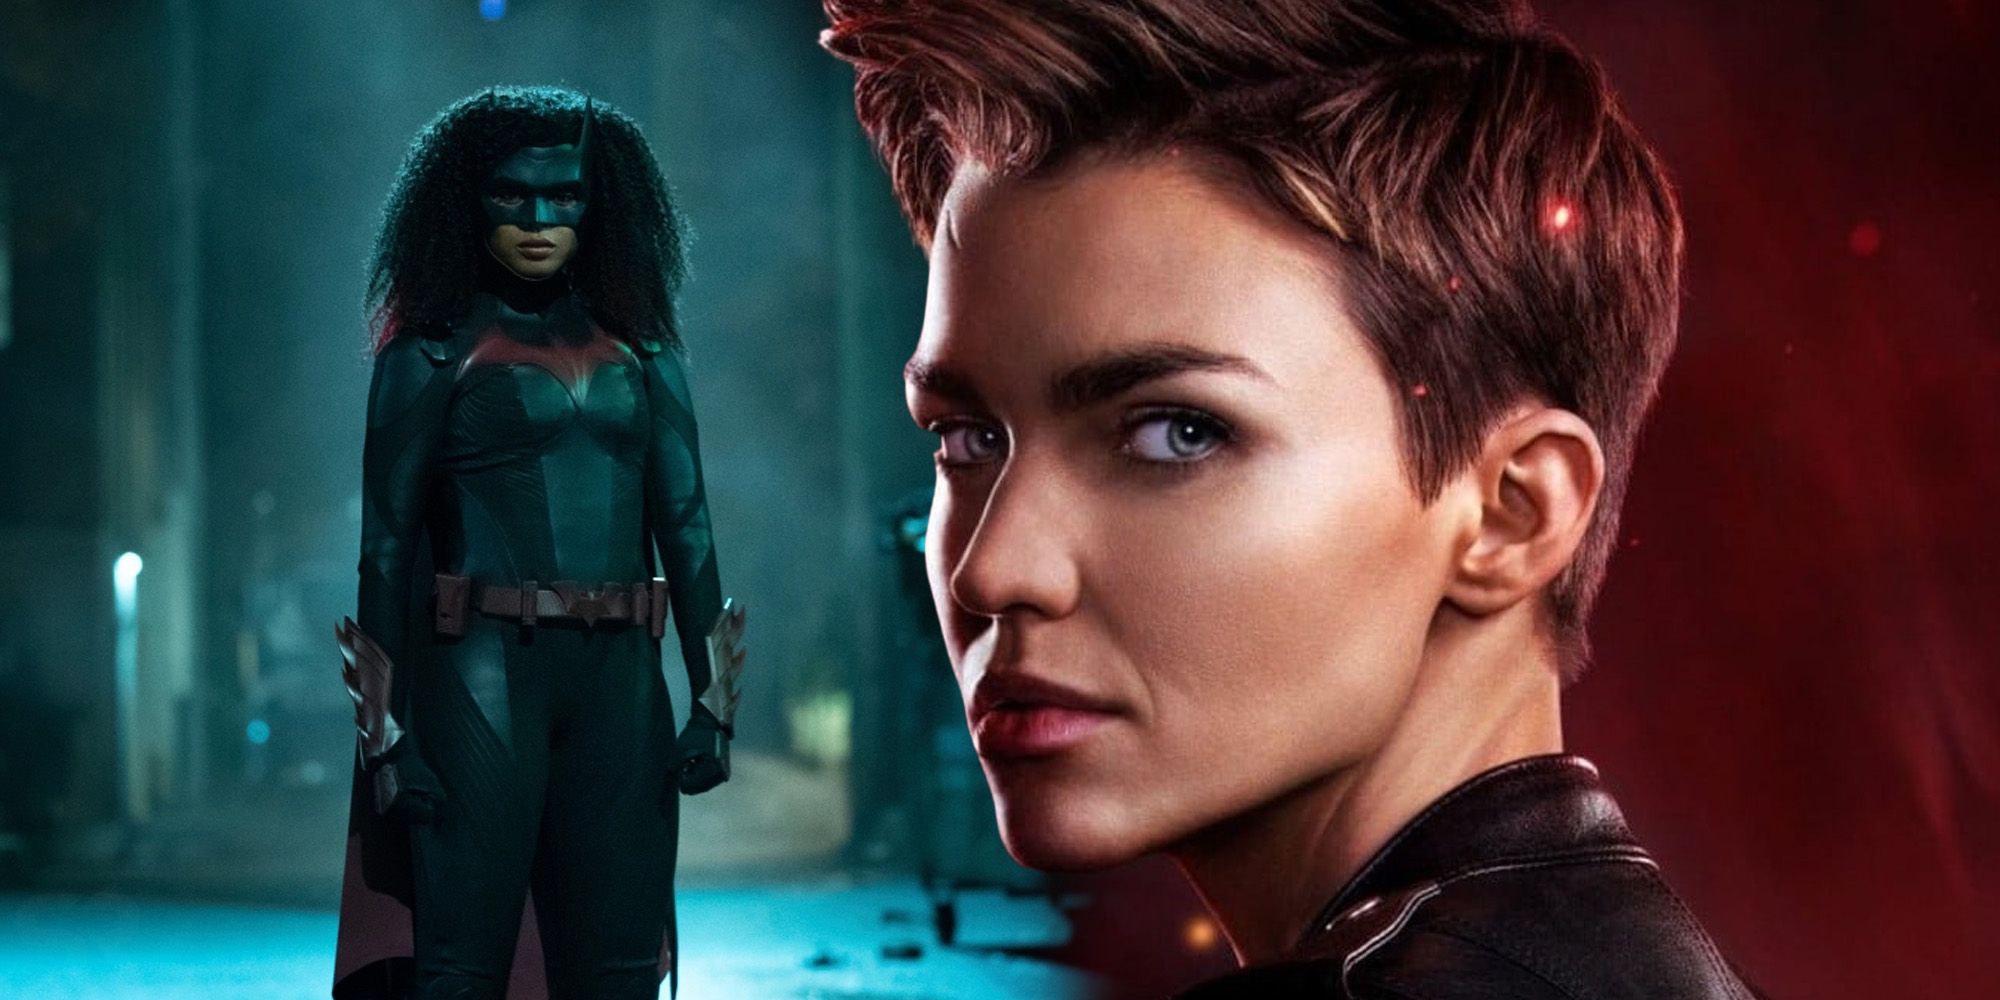 Composite image of Ruby Rose and Javicia Leslie as Ryan Wilder / Batwoman in Batwoman